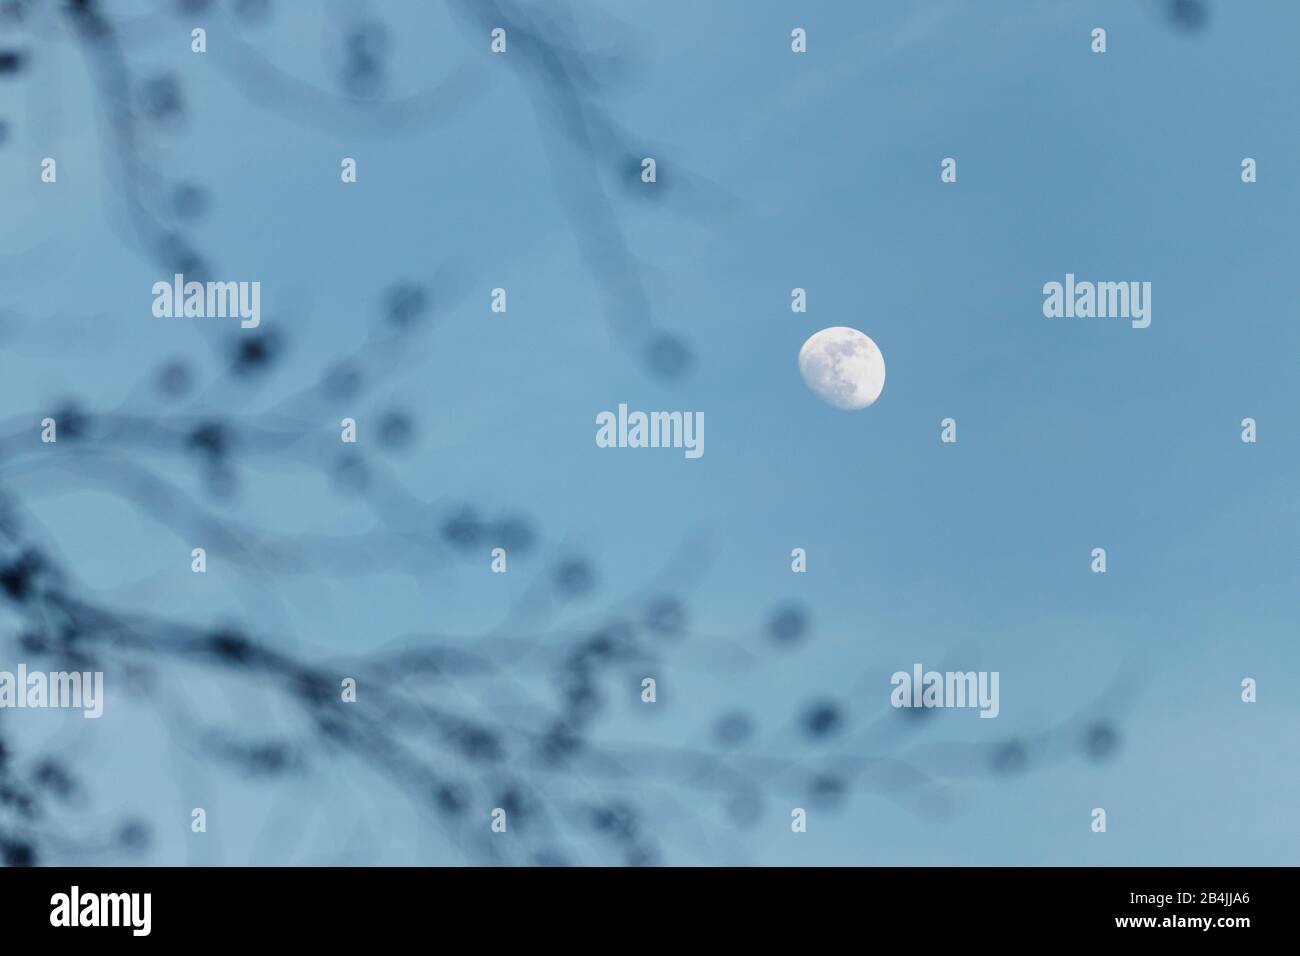 Branches out of focus in front of increasing moon in the sky Stock Photo